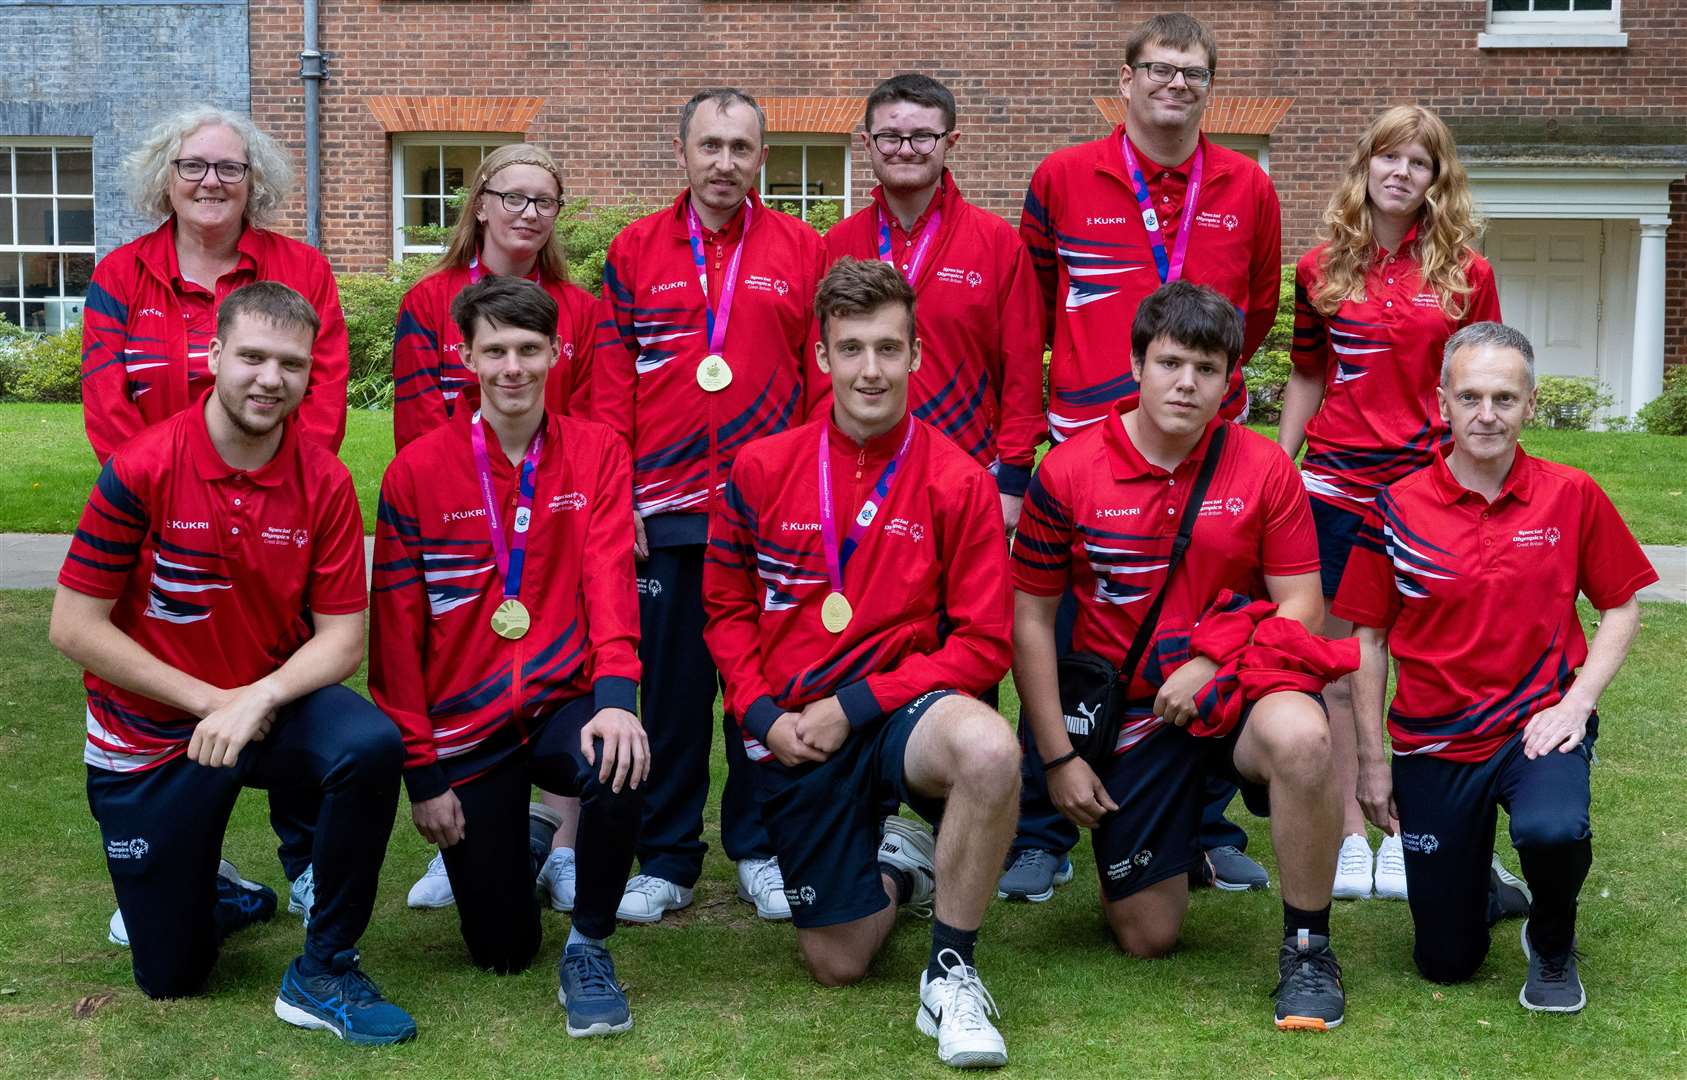 The Team Special Olympics GB squad in the garden of No.10 Downing Street. Picture: Simon Walker / No.10 Downing Street